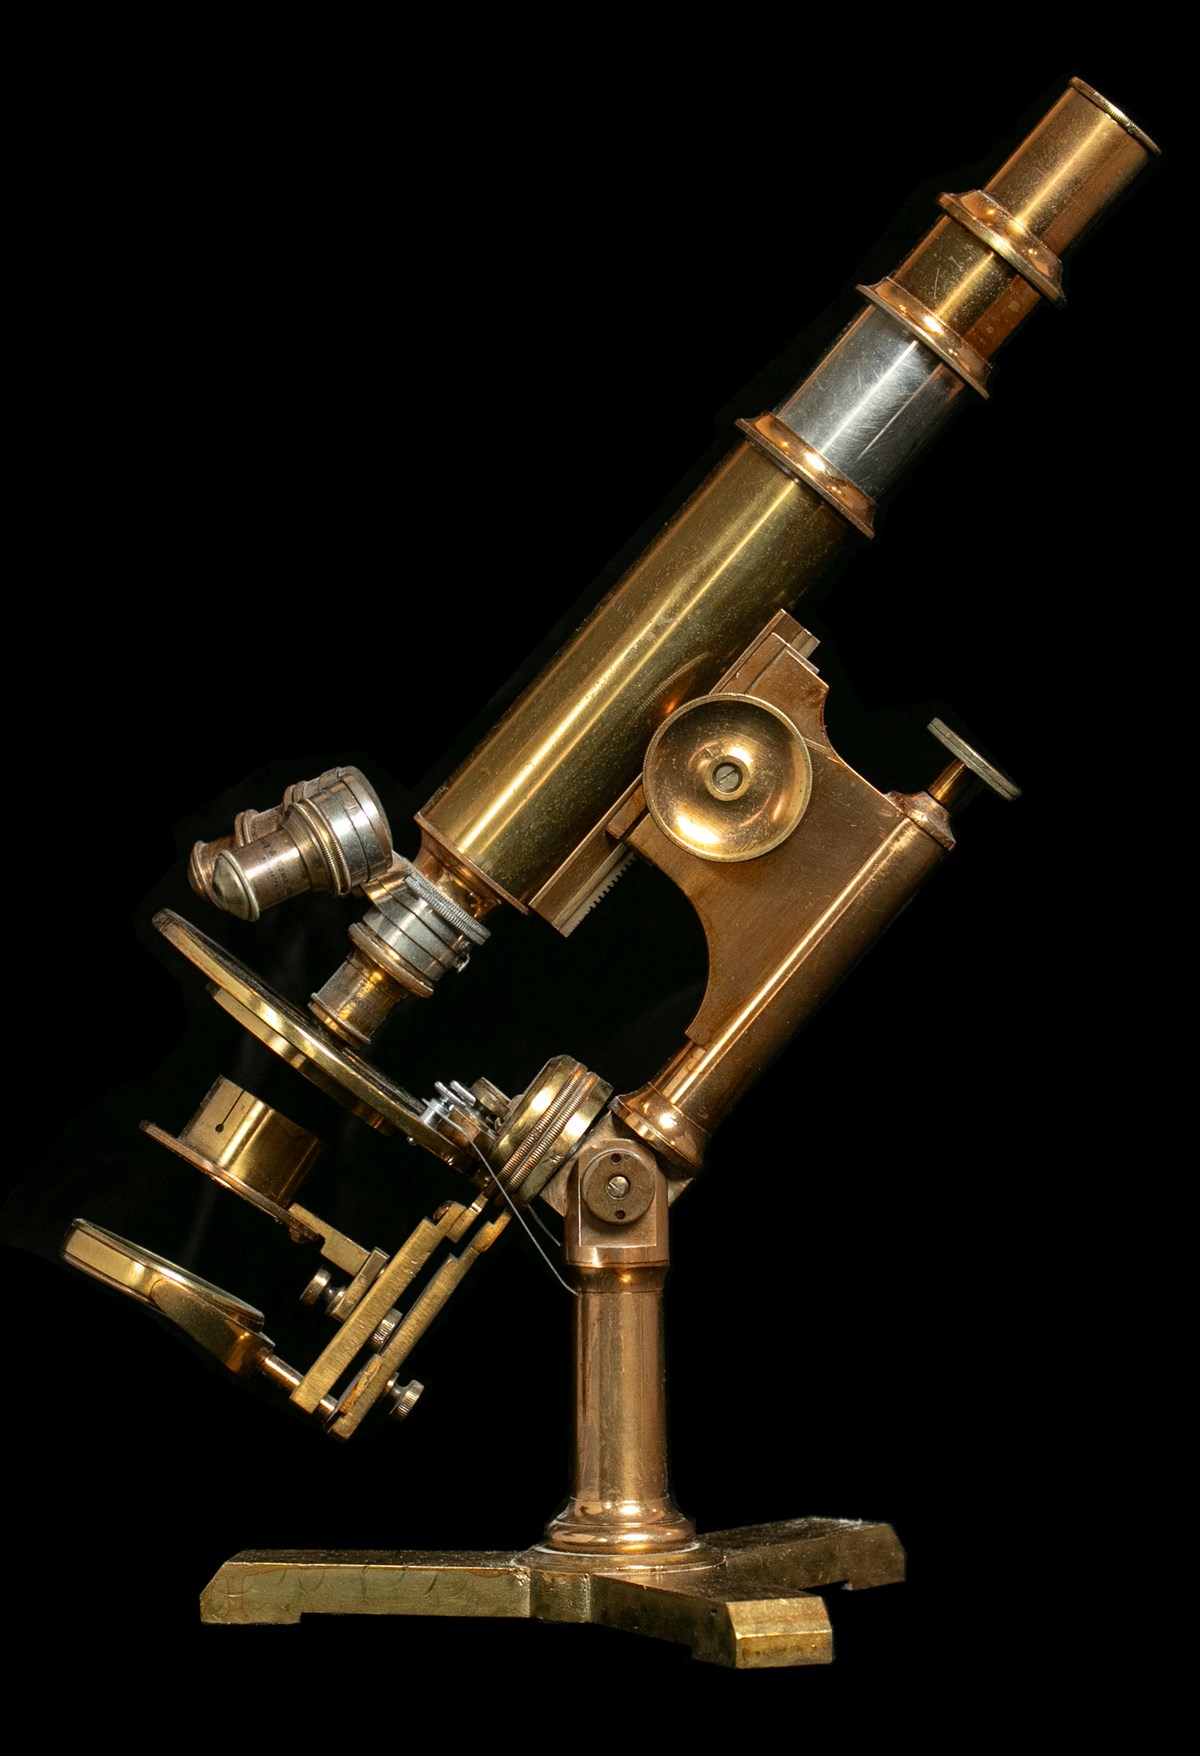 Side view of a brass compound microscope.